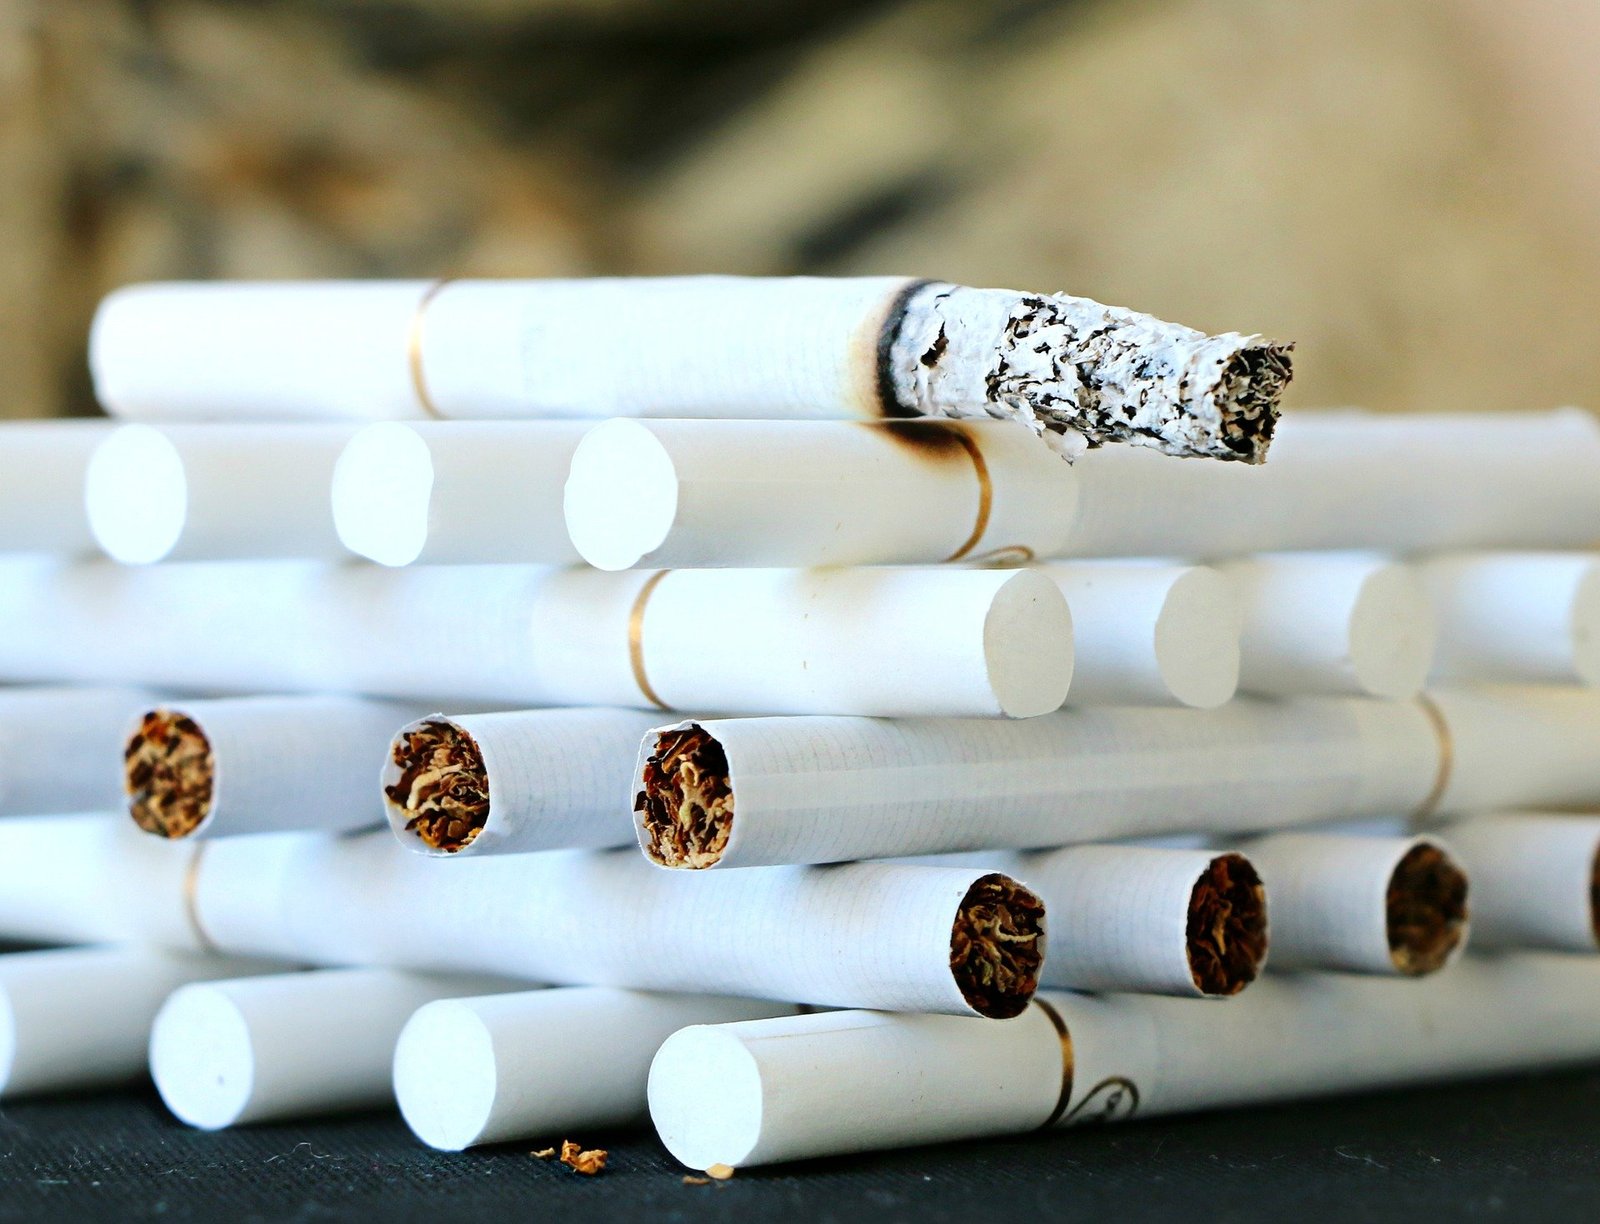 Panama to host anti tobacco talks as industry courts new younger smokers